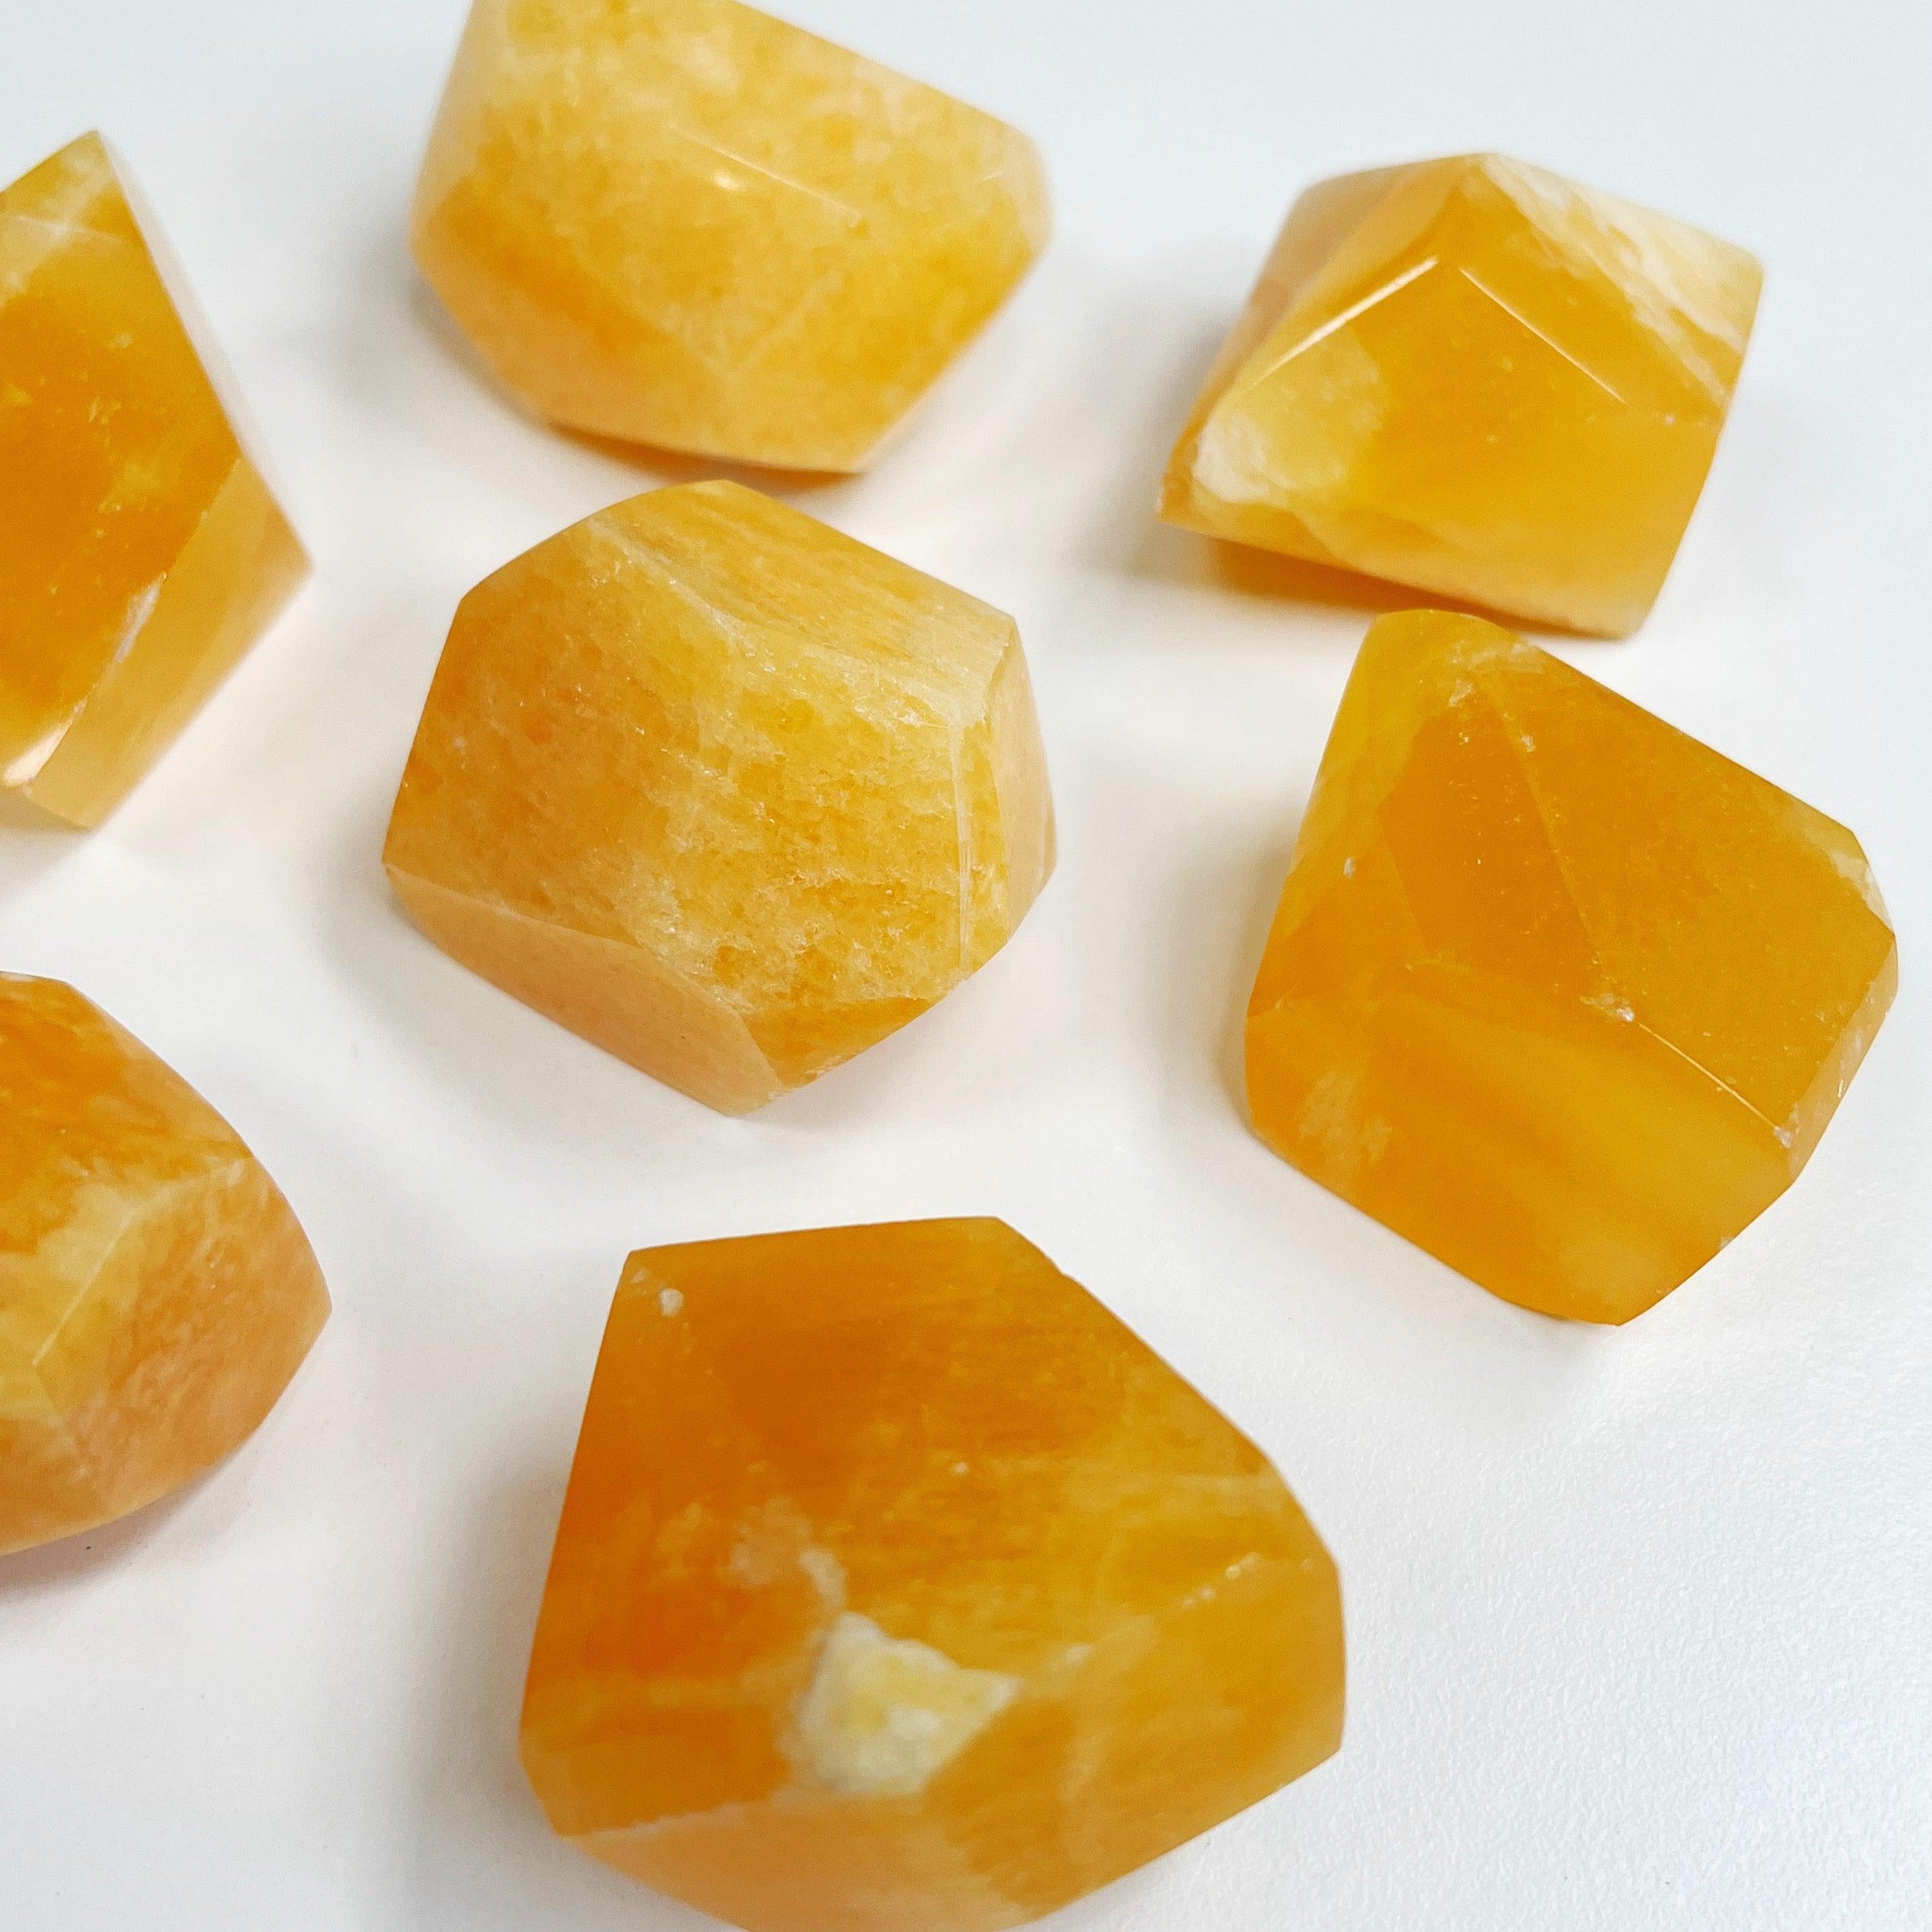 ORANGE CALCITE &quot;GEM&quot; SHAPE - 33 bday, calcite, holiday sale, new year new crystals, orange calcite, polished stone, recently added - The Mineral Maven